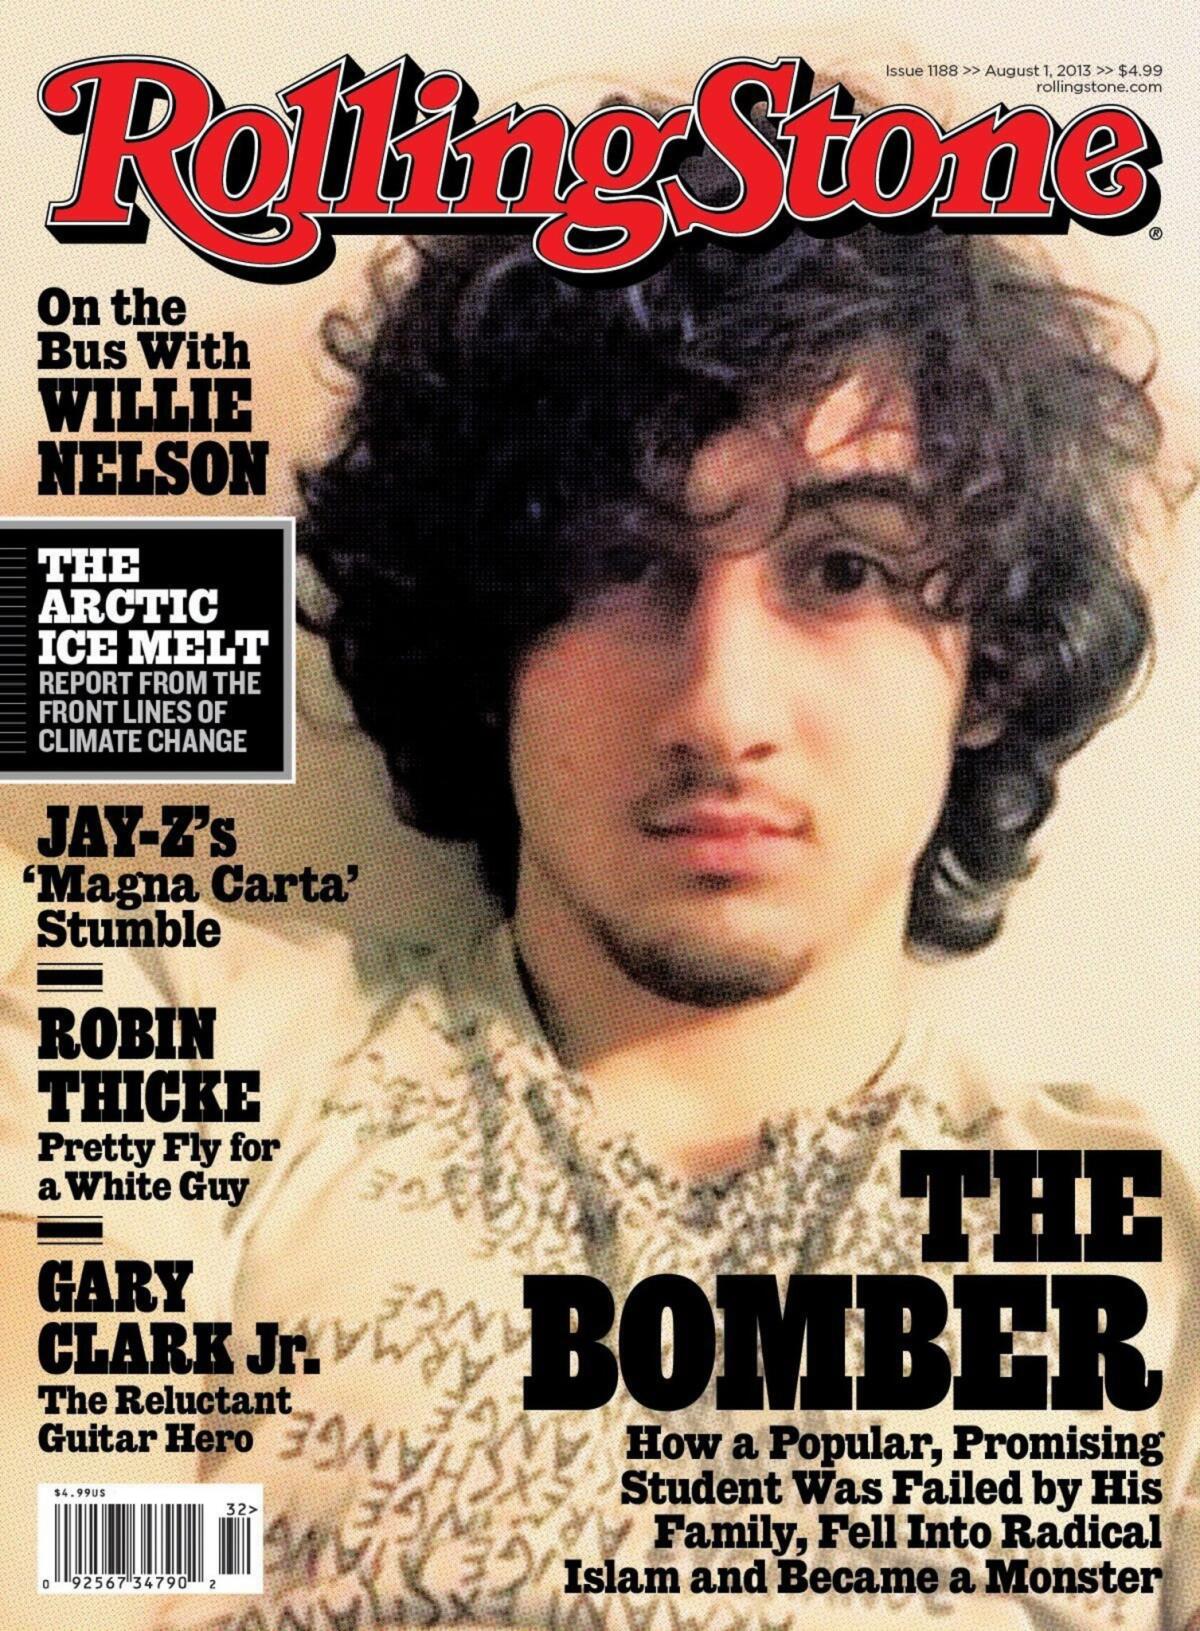 Rolling Stone's July issue featuring Boston Marathon bombing suspect Dzokhar Tsarnaev sold nearly twice the magazine's average sales, according to a sales tracking firm.